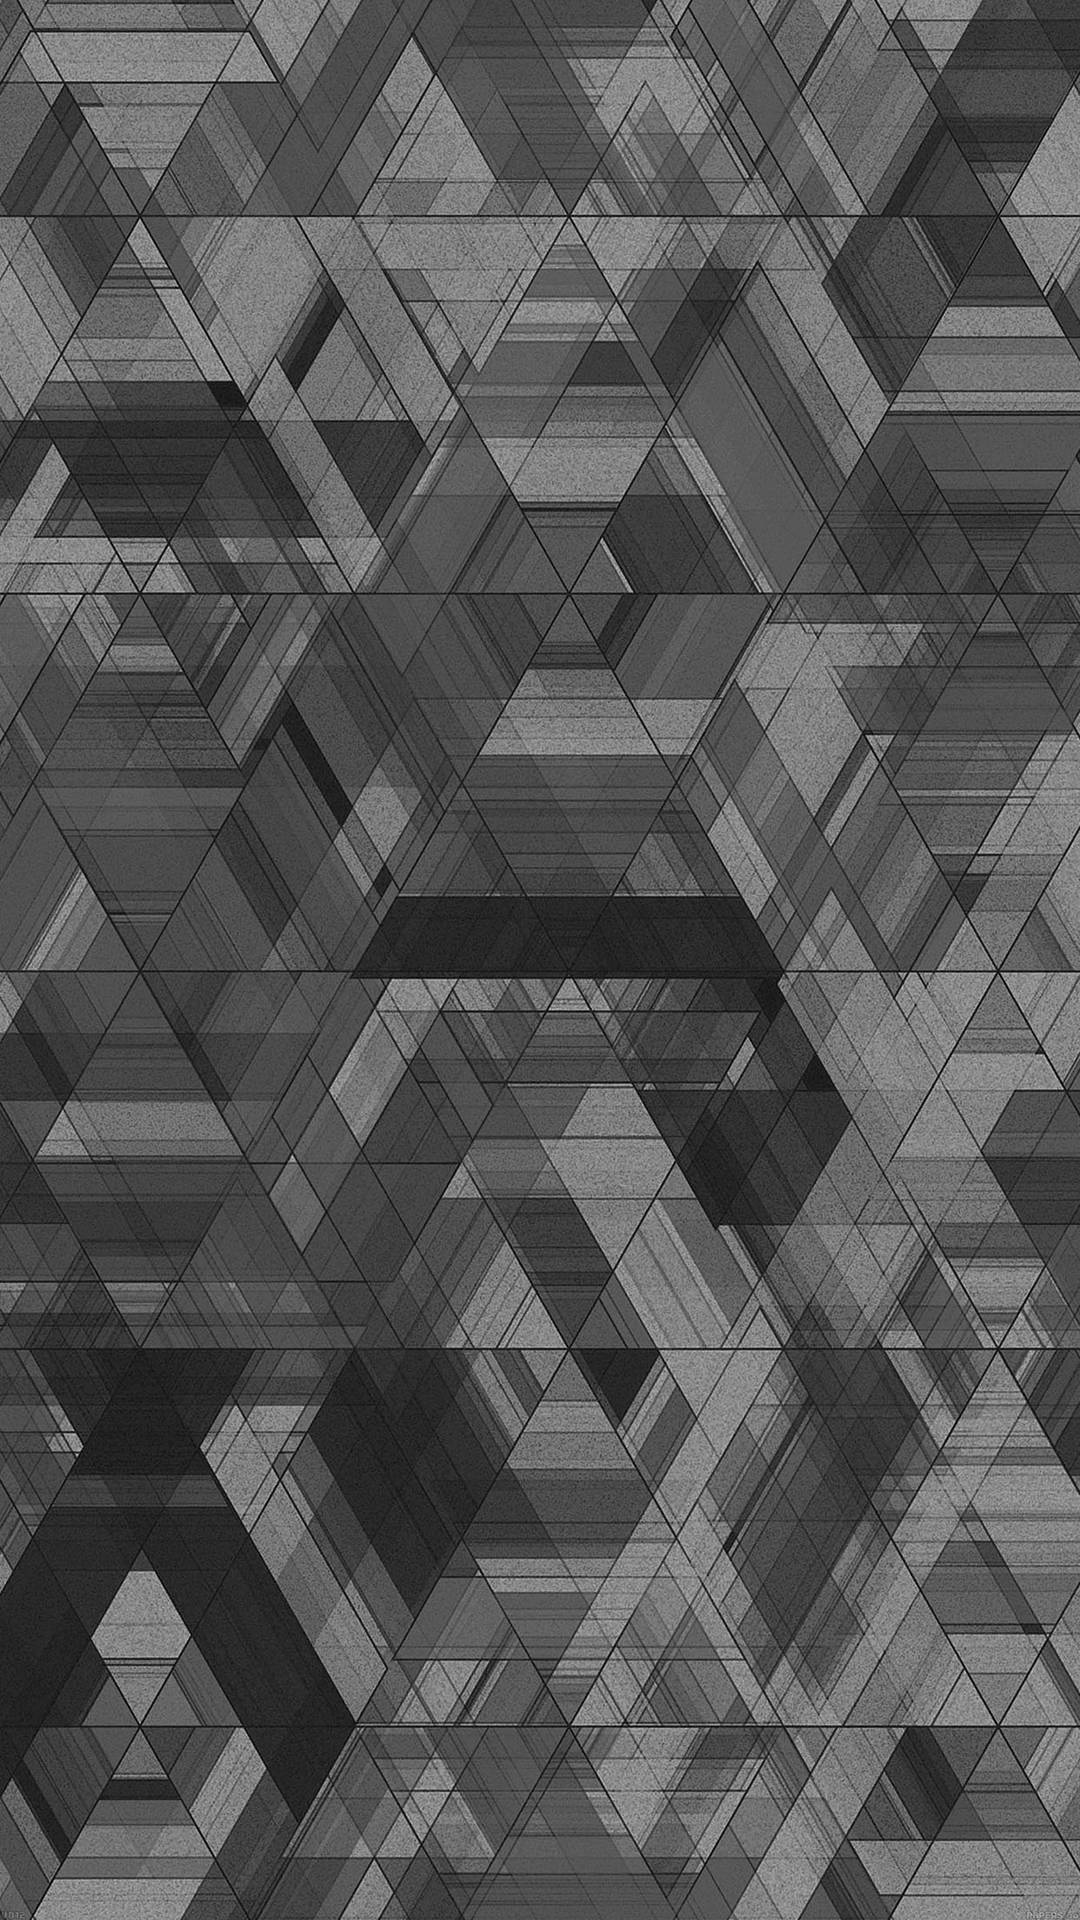 Sketch Triangles Black And Grey Iphone